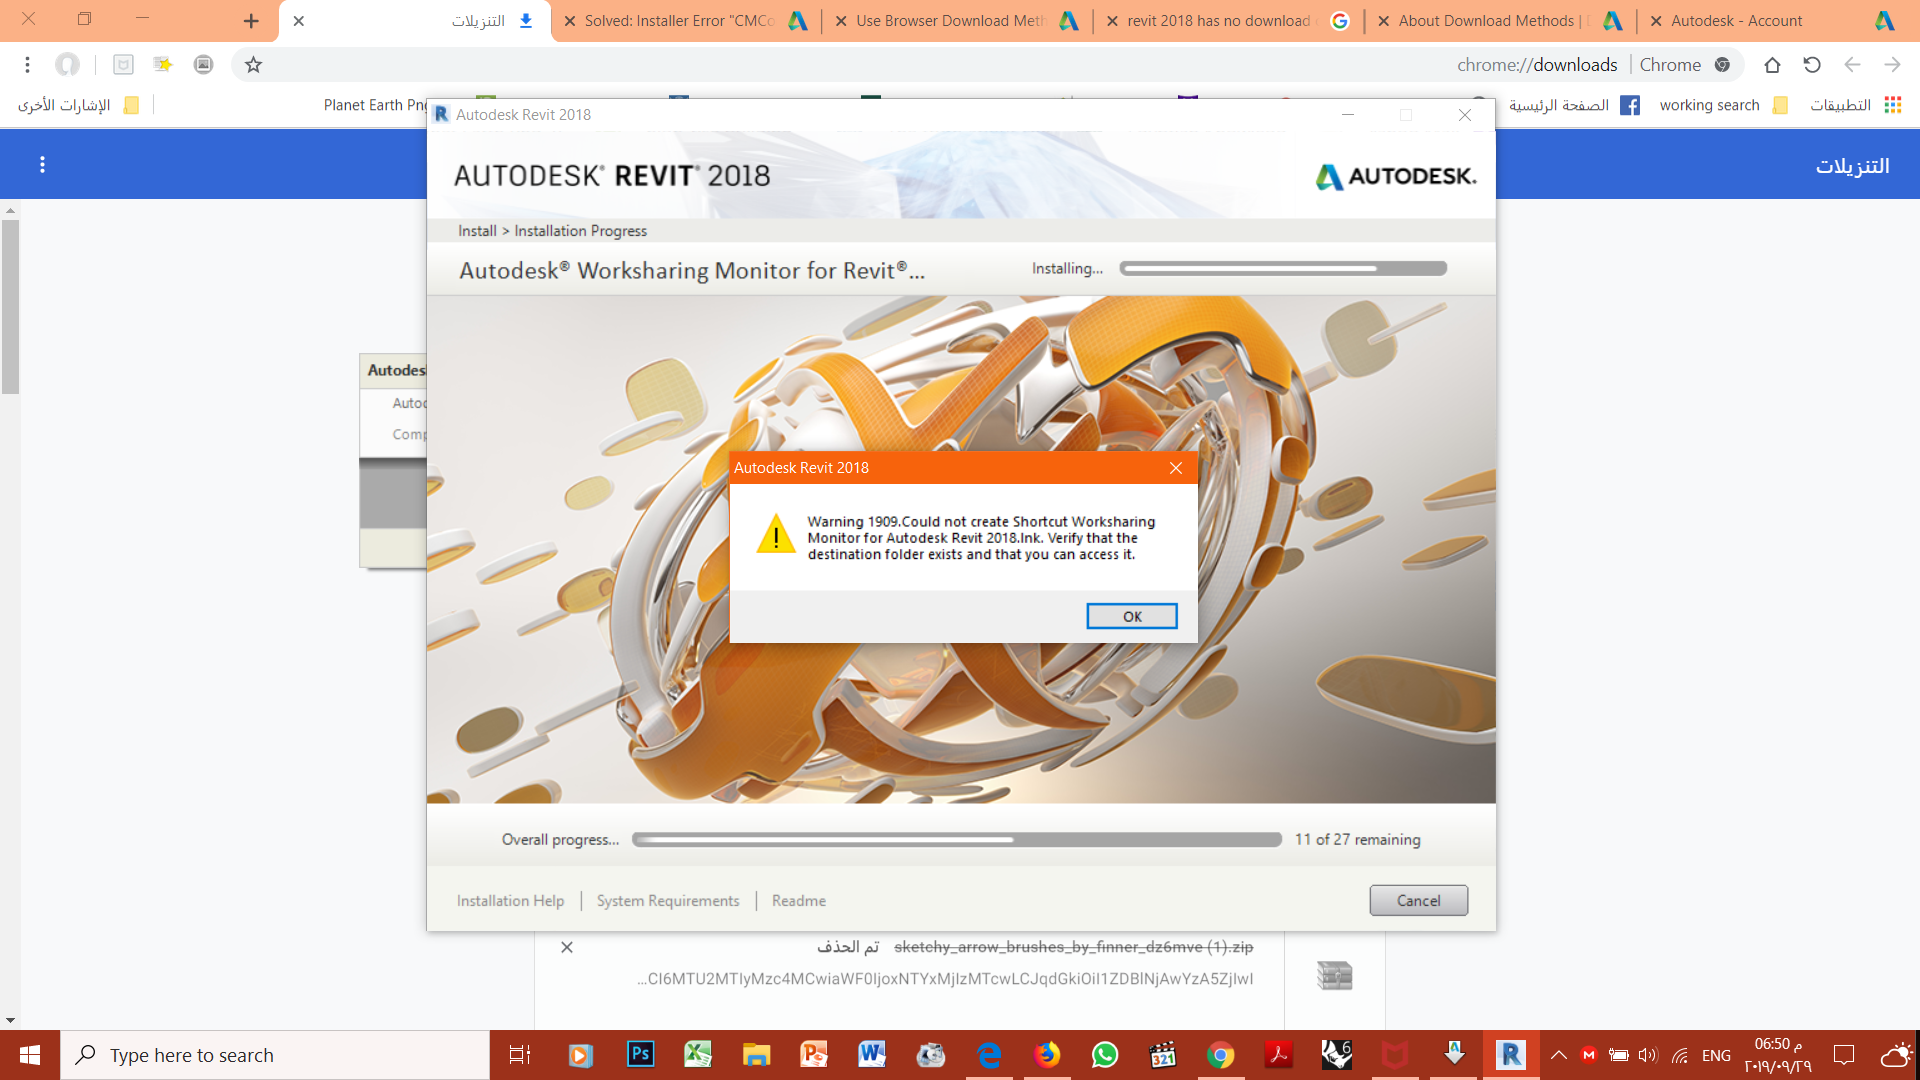 creating temporary files problem + warning 1909 when installing autodesk revit 2018 ca276bea-d98f-42e8-aa1f-6769e36cd998?upload=true.png